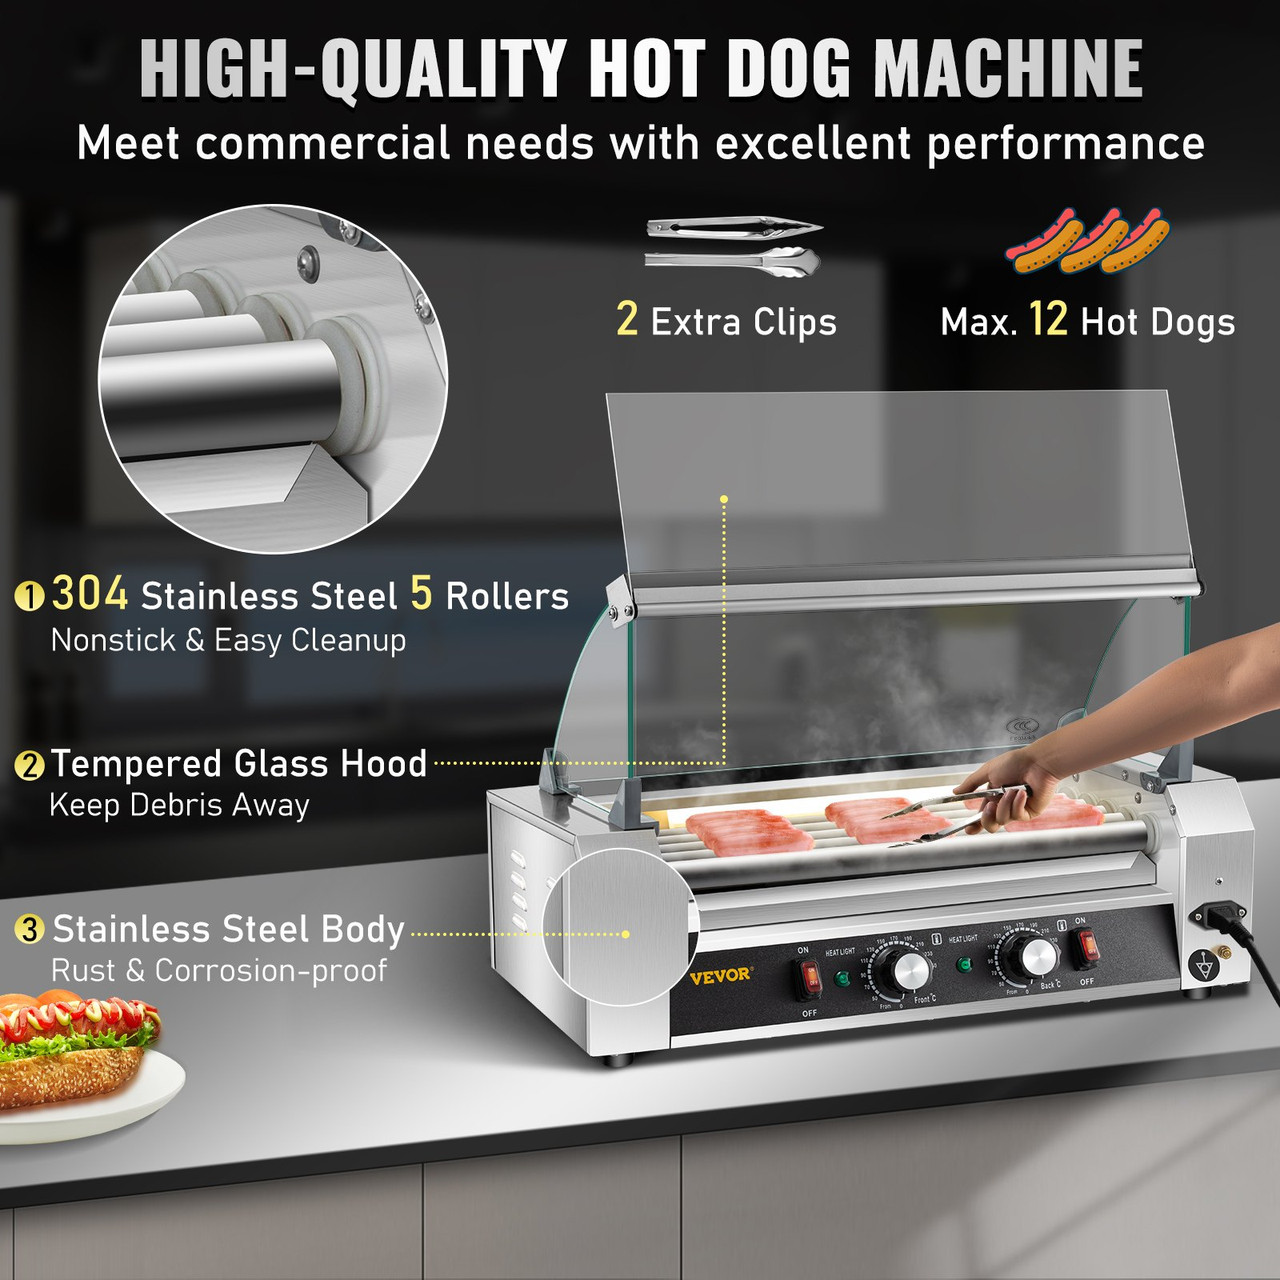 Hot Dog Roller, 12 Hot Dog Capacity 5 Rollers, 750W Stainless Steel Cook Warmer Machine with Cover & Dual Temp Control, LED Light & Detachable Drip Tray, Sausage Grill Cooker for Kitchen Canteen